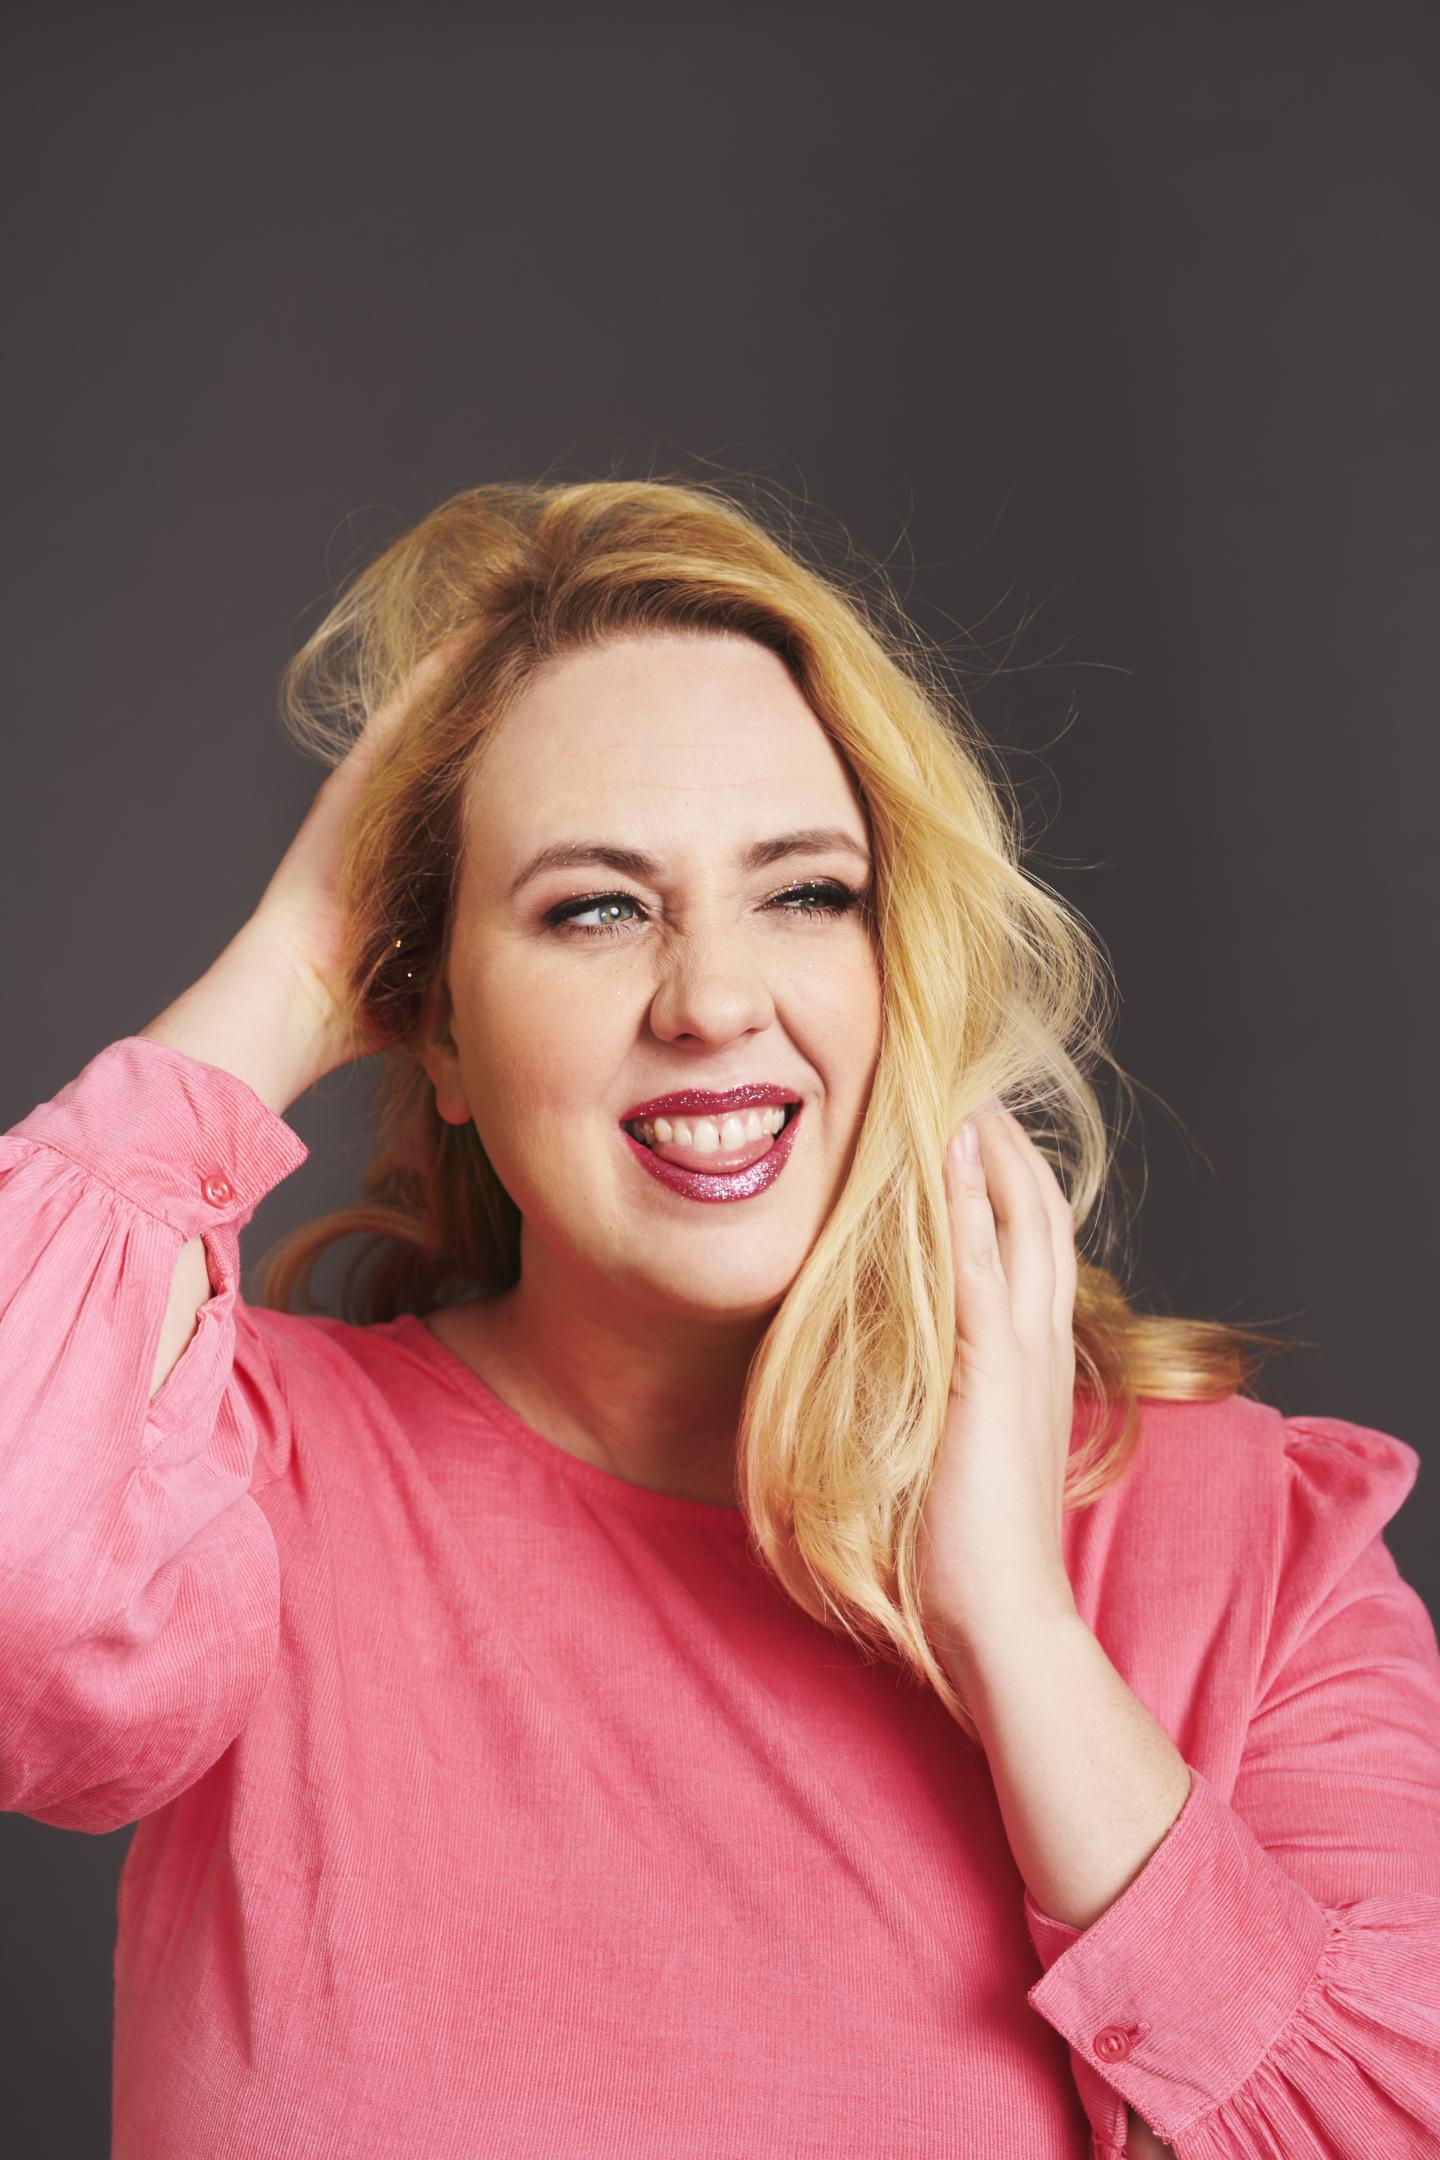 Image of Helen Bauer, comedian, who has mid-length blonde hair and is wearing a pink jumper